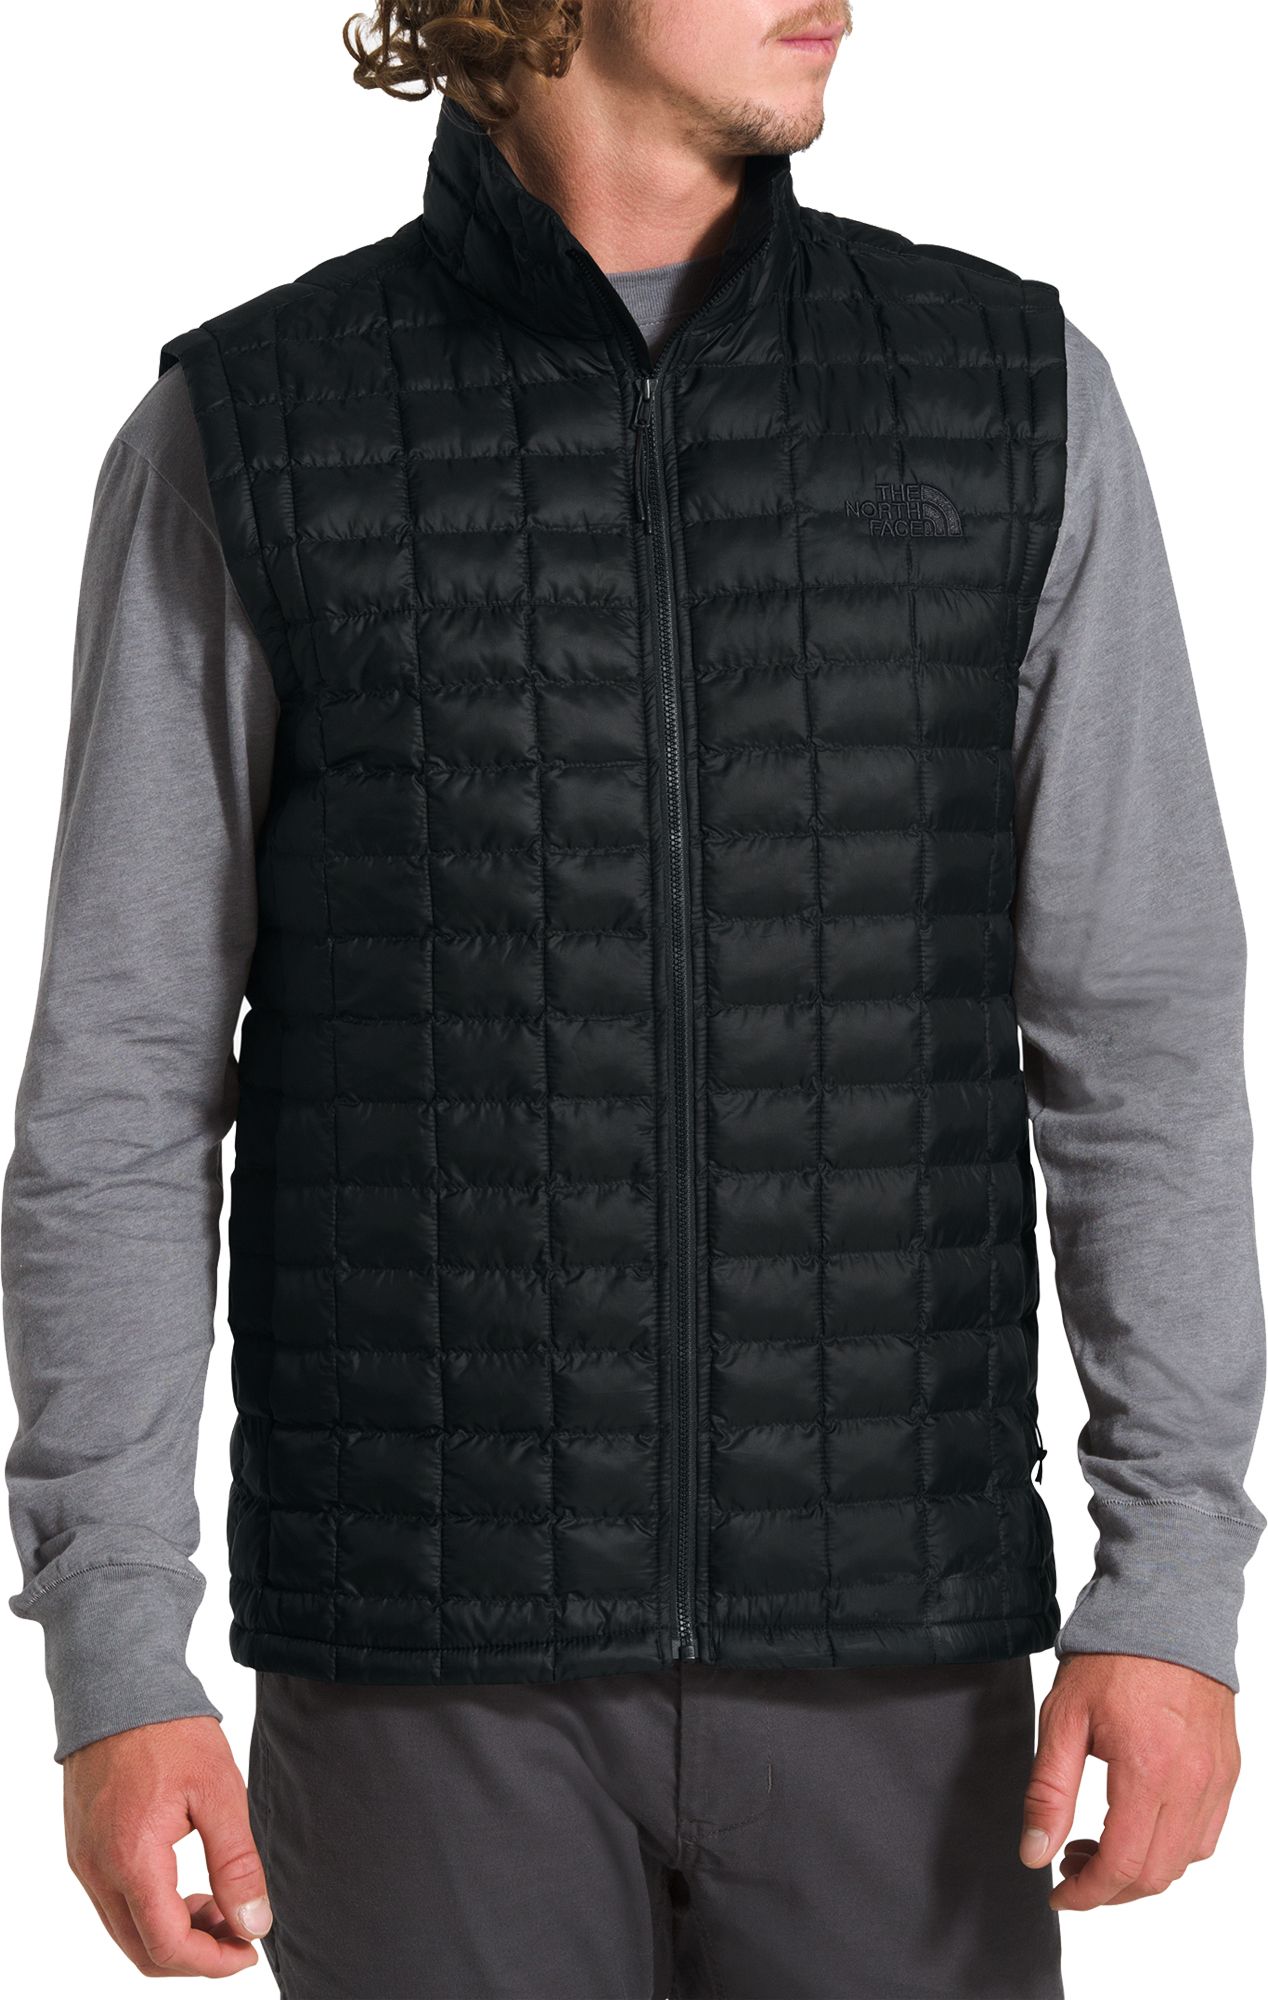 thermoball vest mens